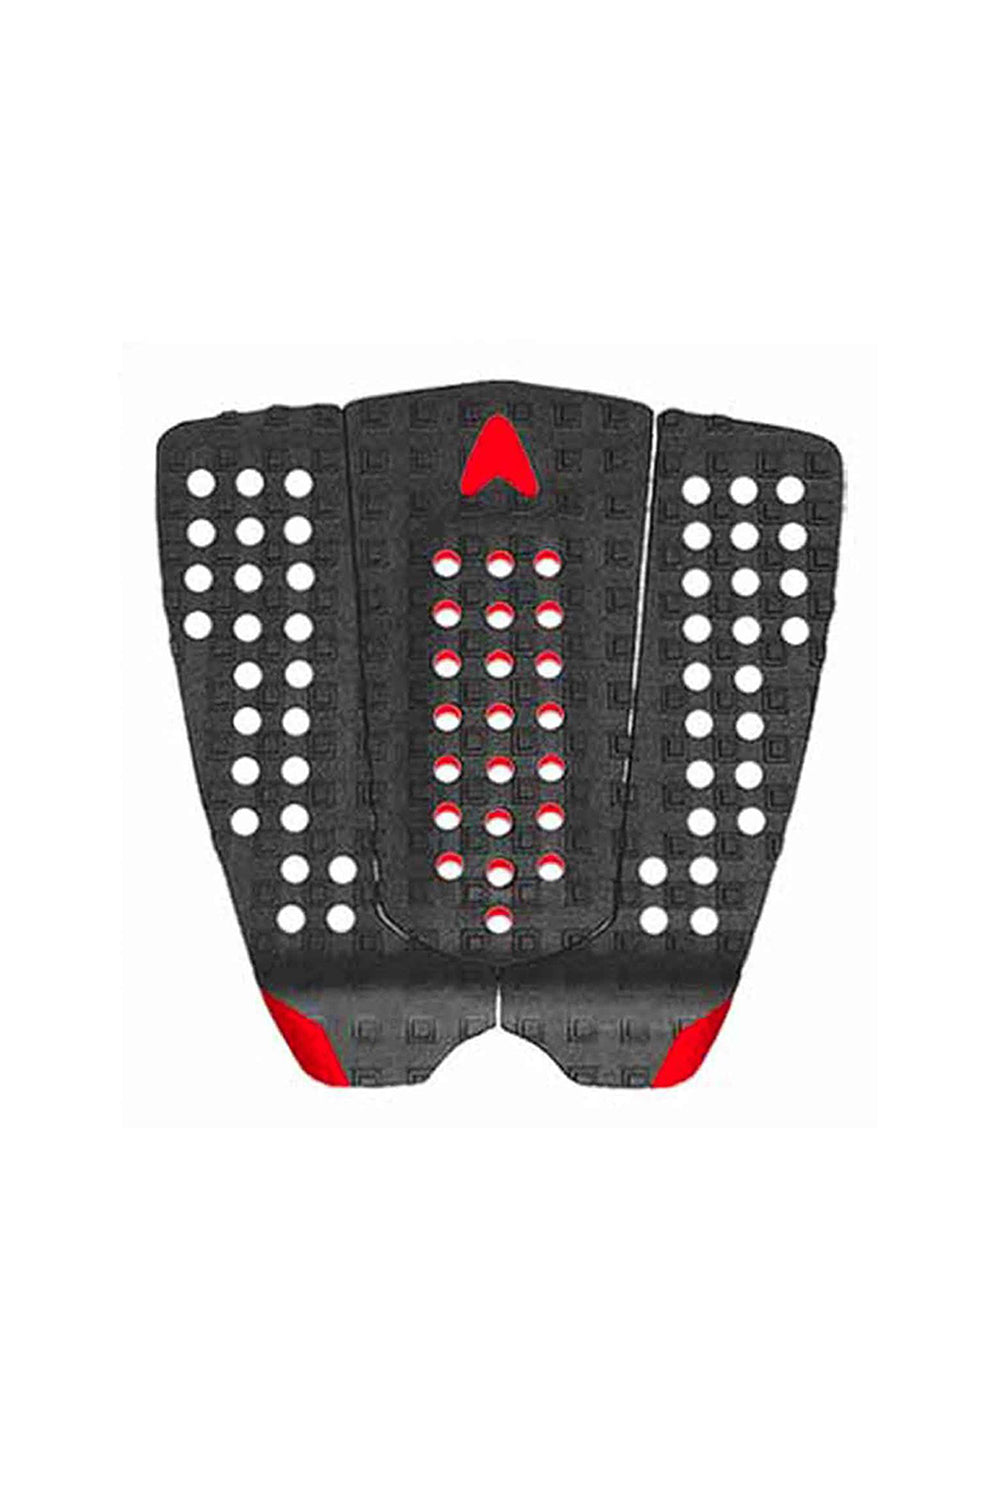 Astro Deck New Nathan - Black / Red Grip Pad Traction